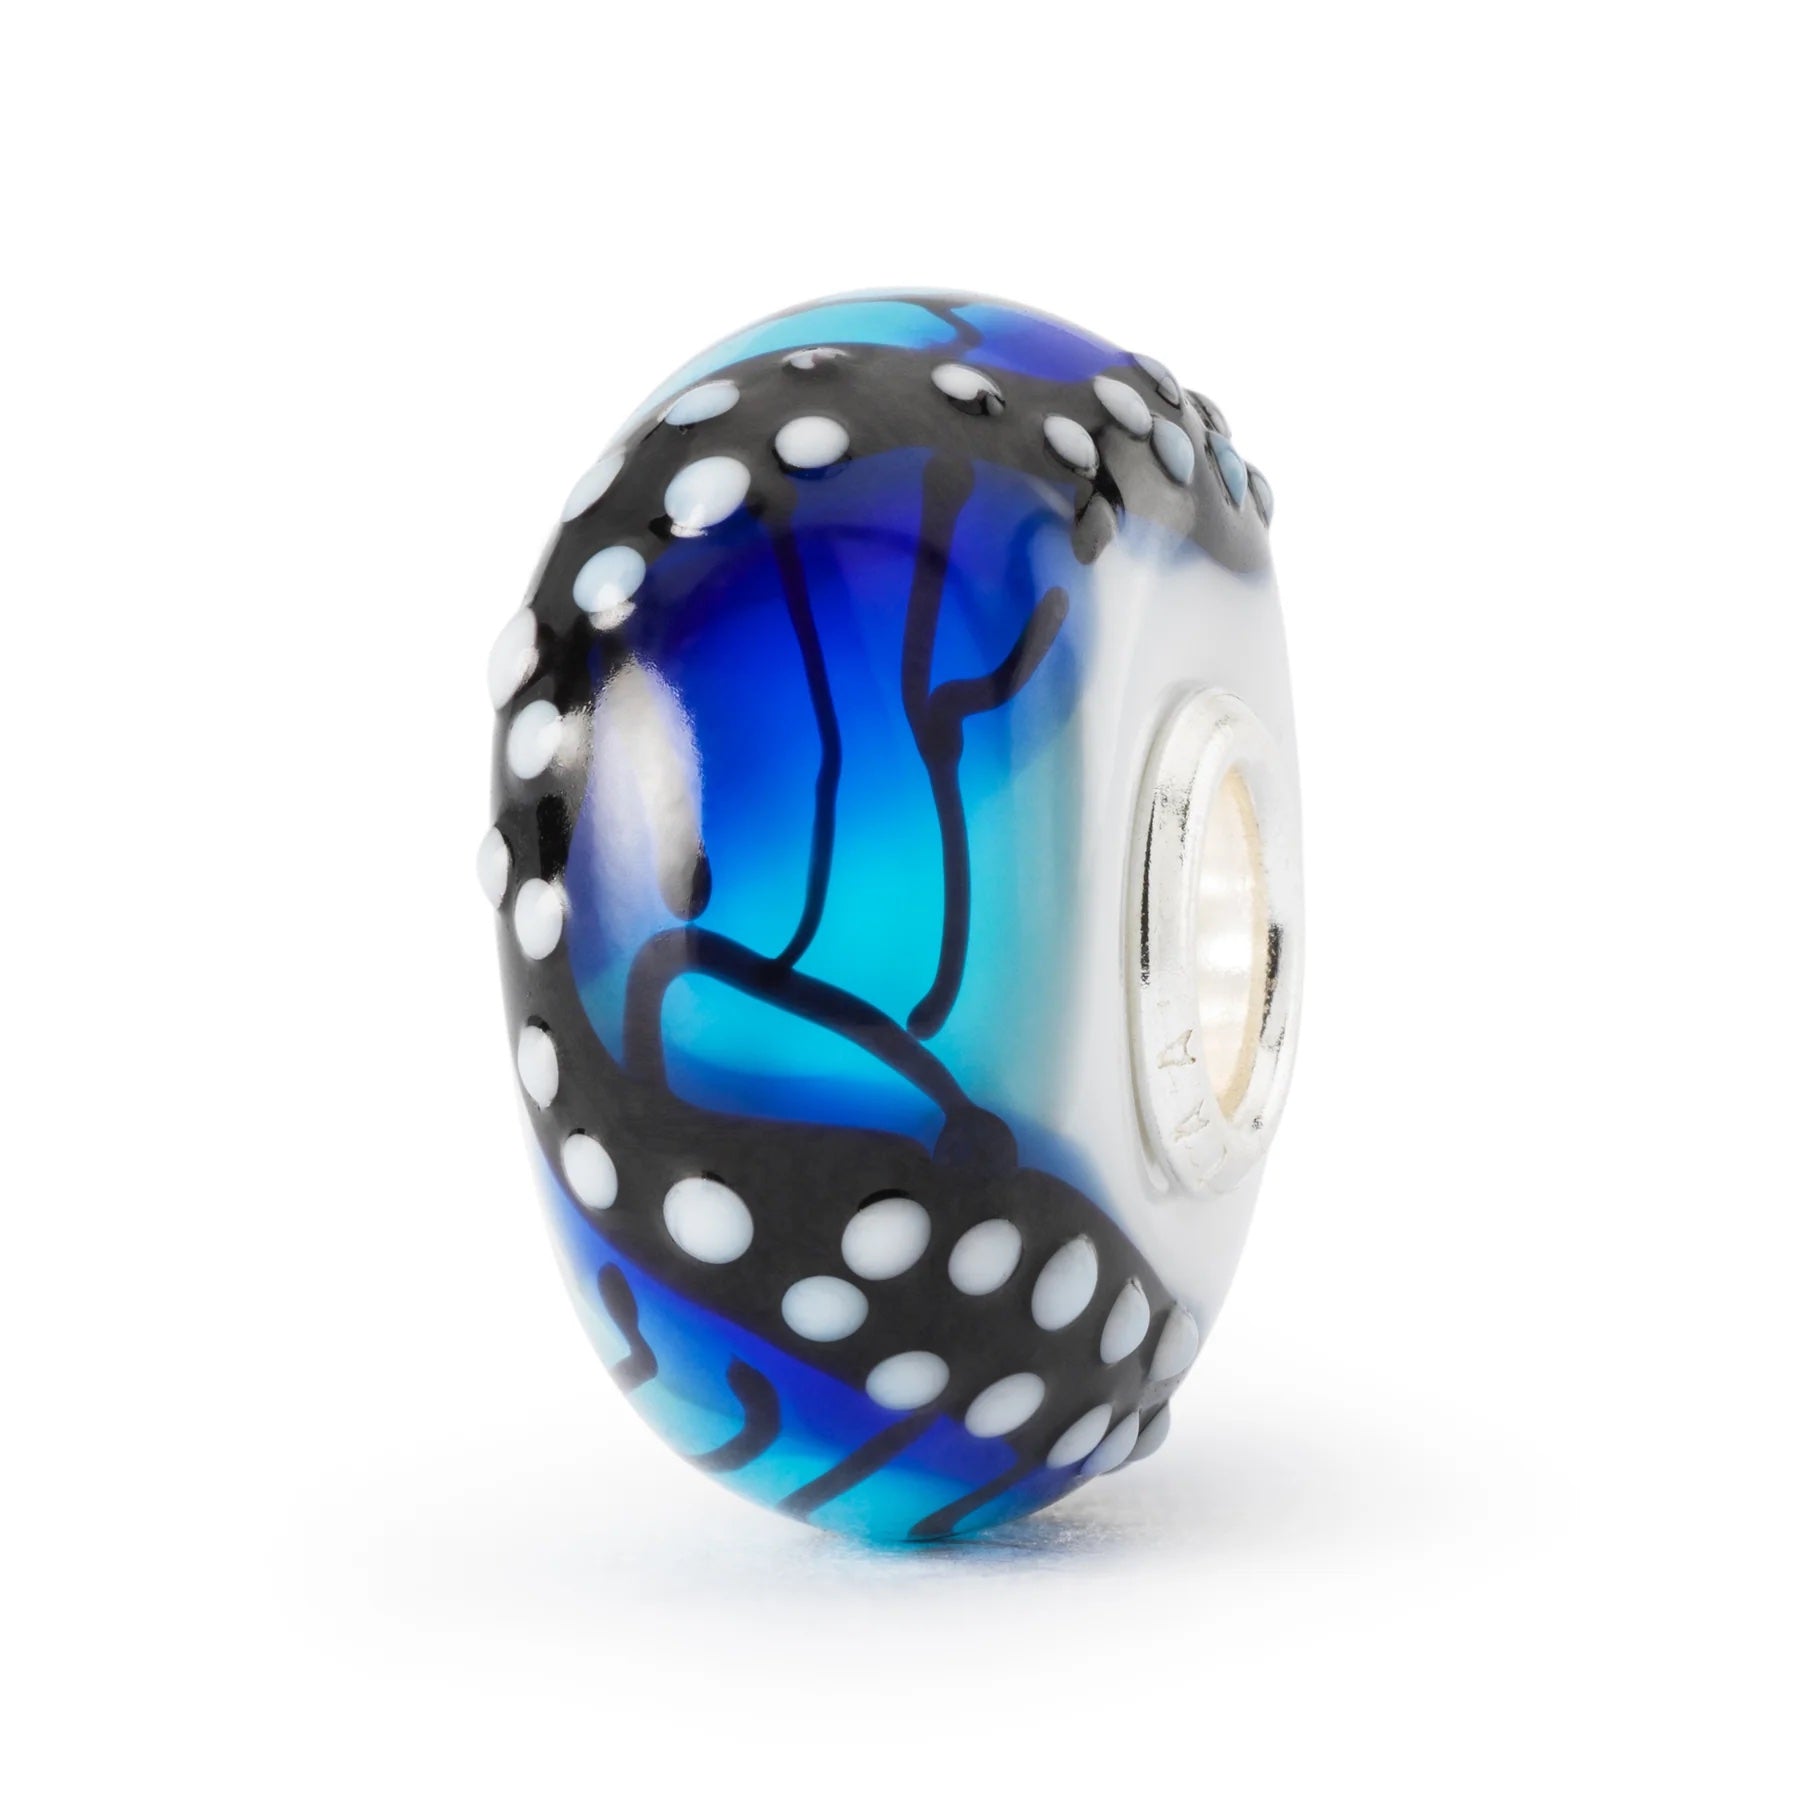 Trollbeads Wings of Serenity Limited Edition Glass Bead